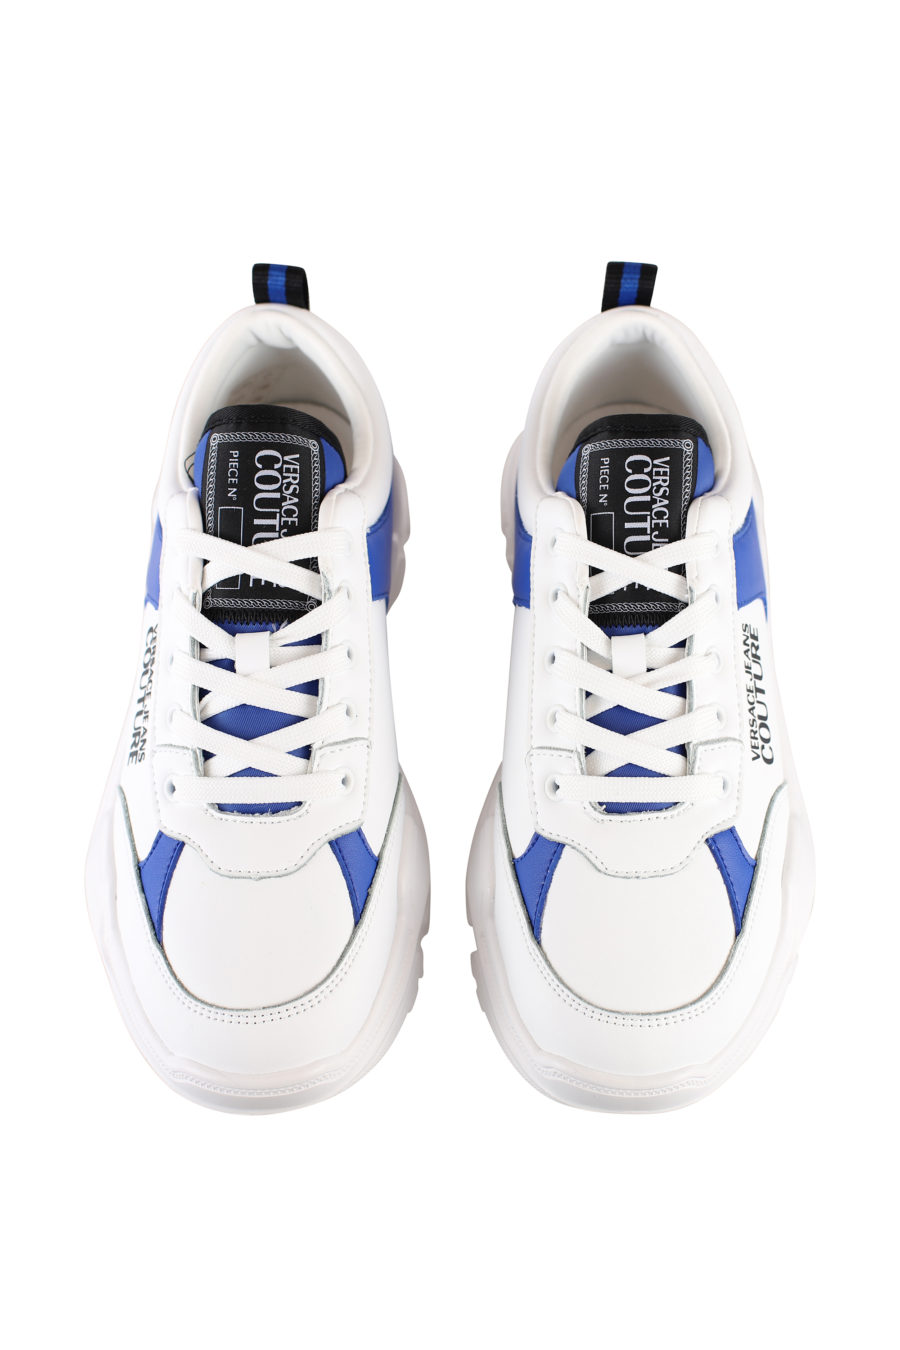 White and blue "Speedtrack" shoes - IMG 1952